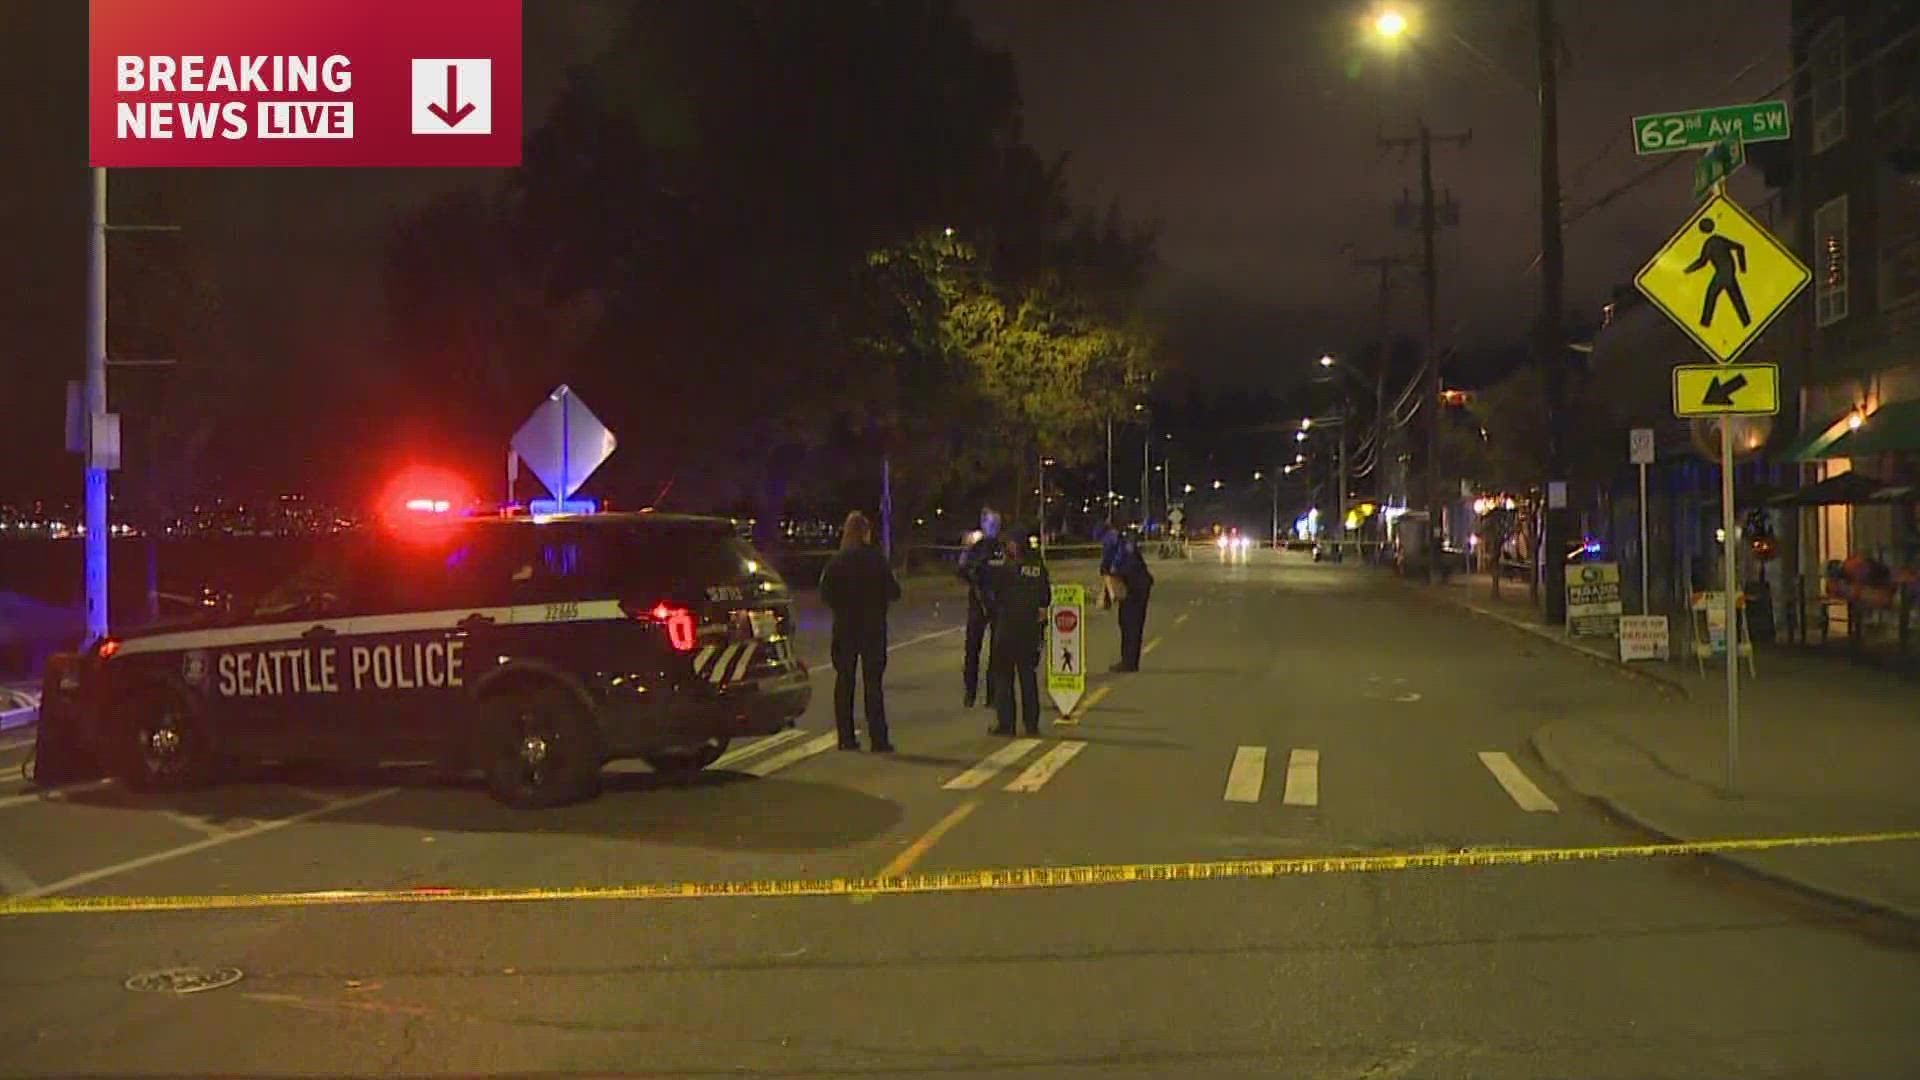 A 37-year-old man and a 37-year-old woman were shot and injured. Both were taken to Harborview Medical Center.